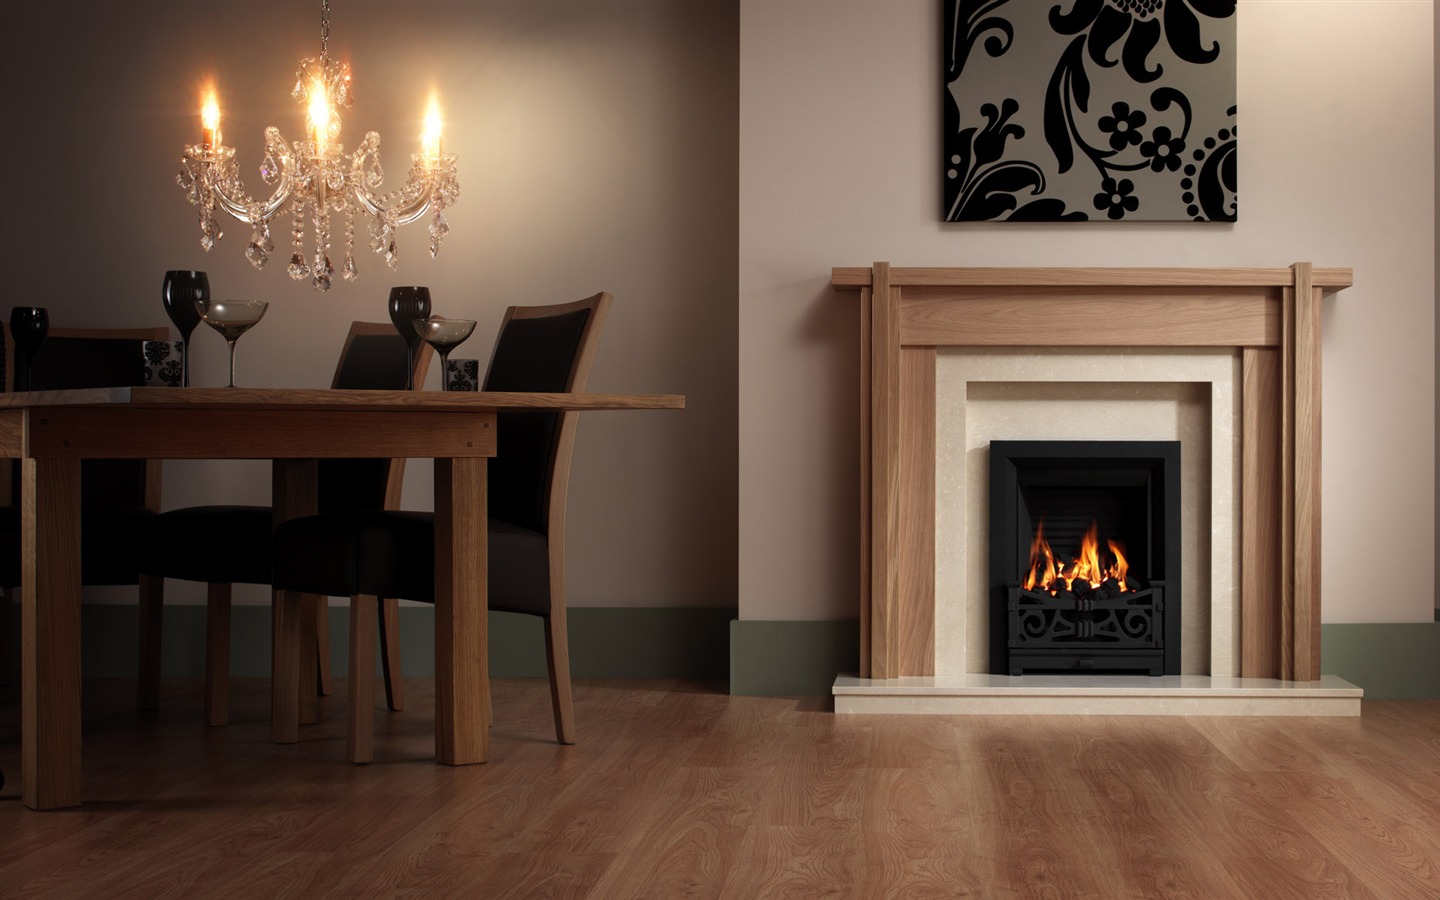 Western-style family fireplace wallpaper (1) #13 - 1440x900